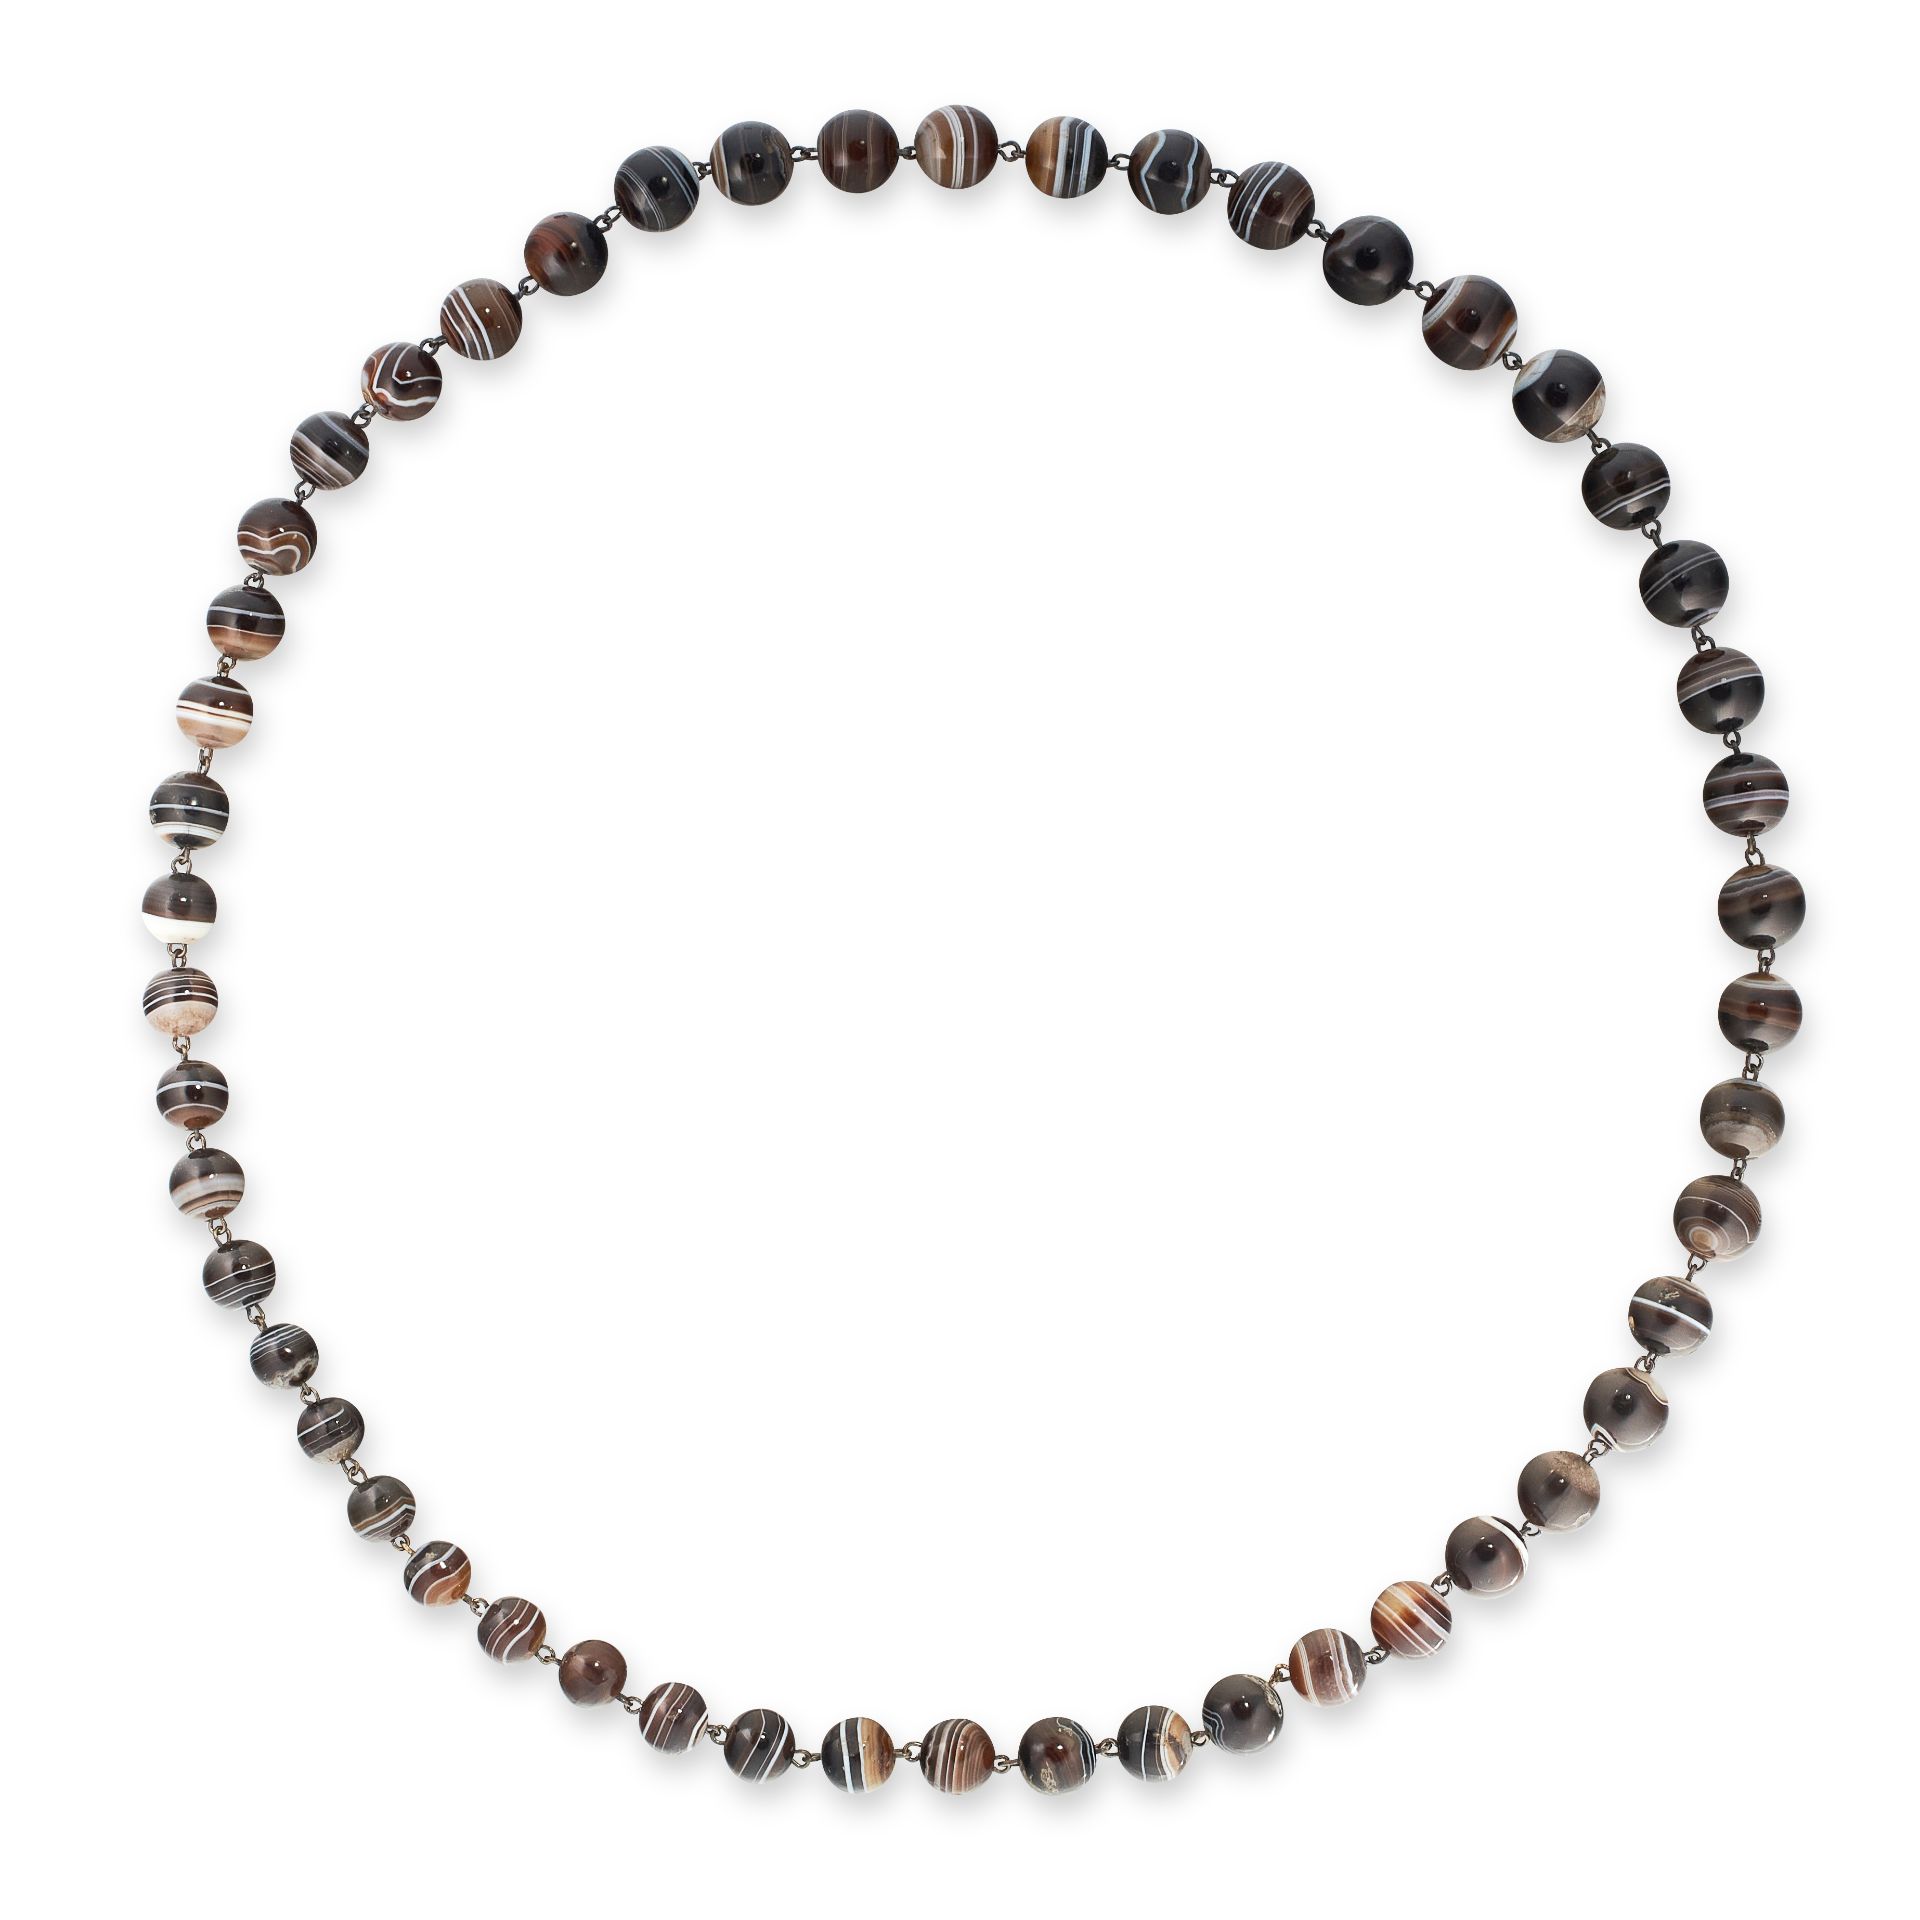 AN ANTIQUE BANDED AGATE SAUTOIR NECKLACE in silver, comprising a single row of fifty graduated